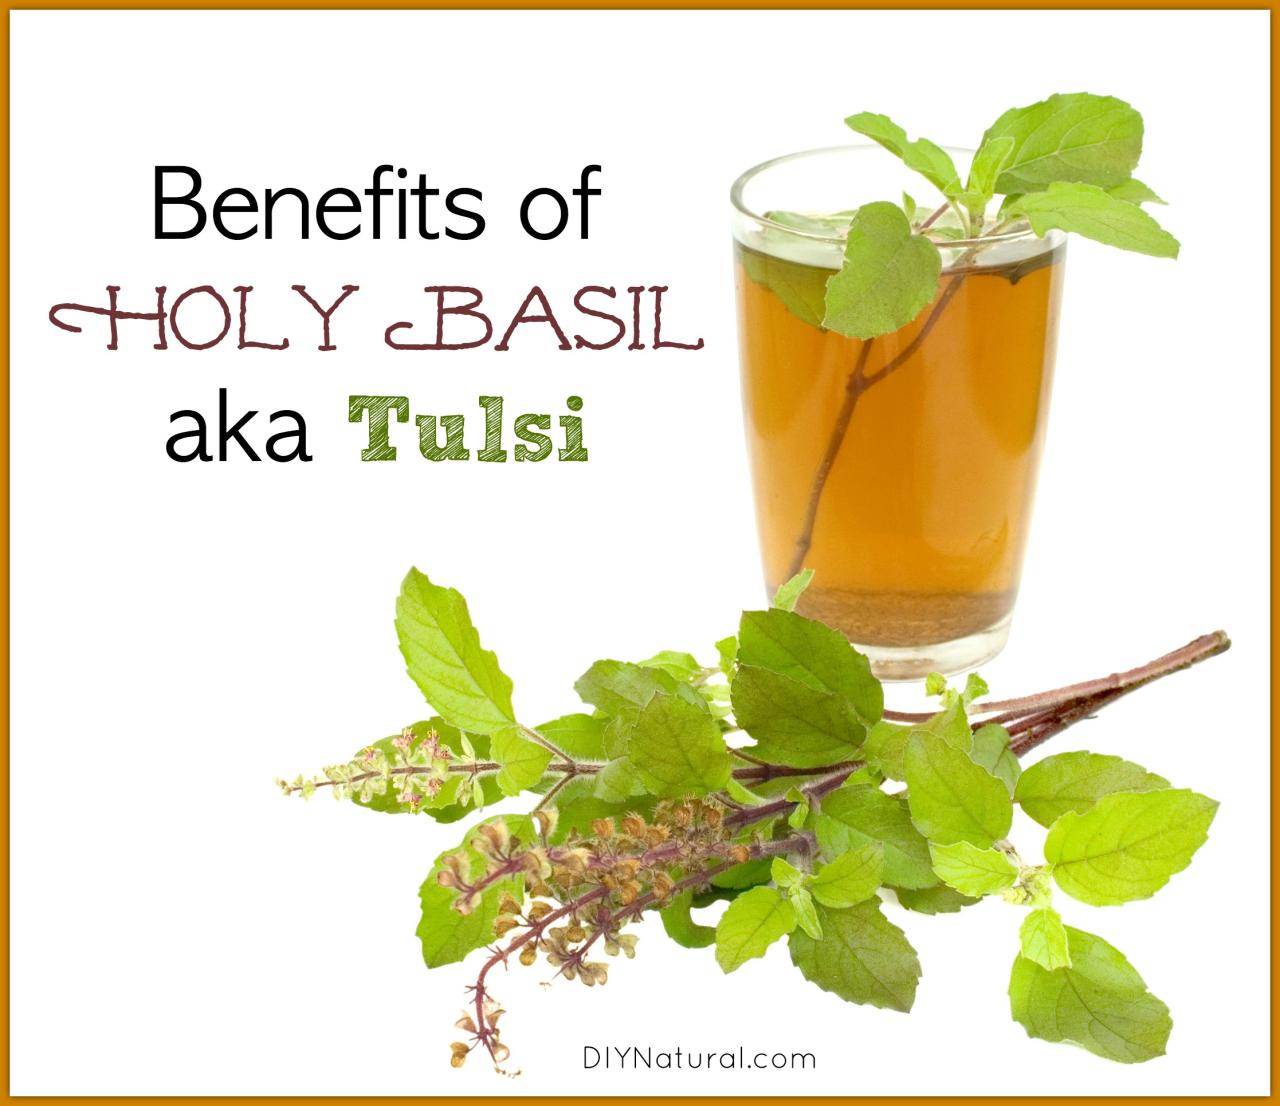 Tulsi benefits basil holy amazing health clearing wonders cough do stylenrich